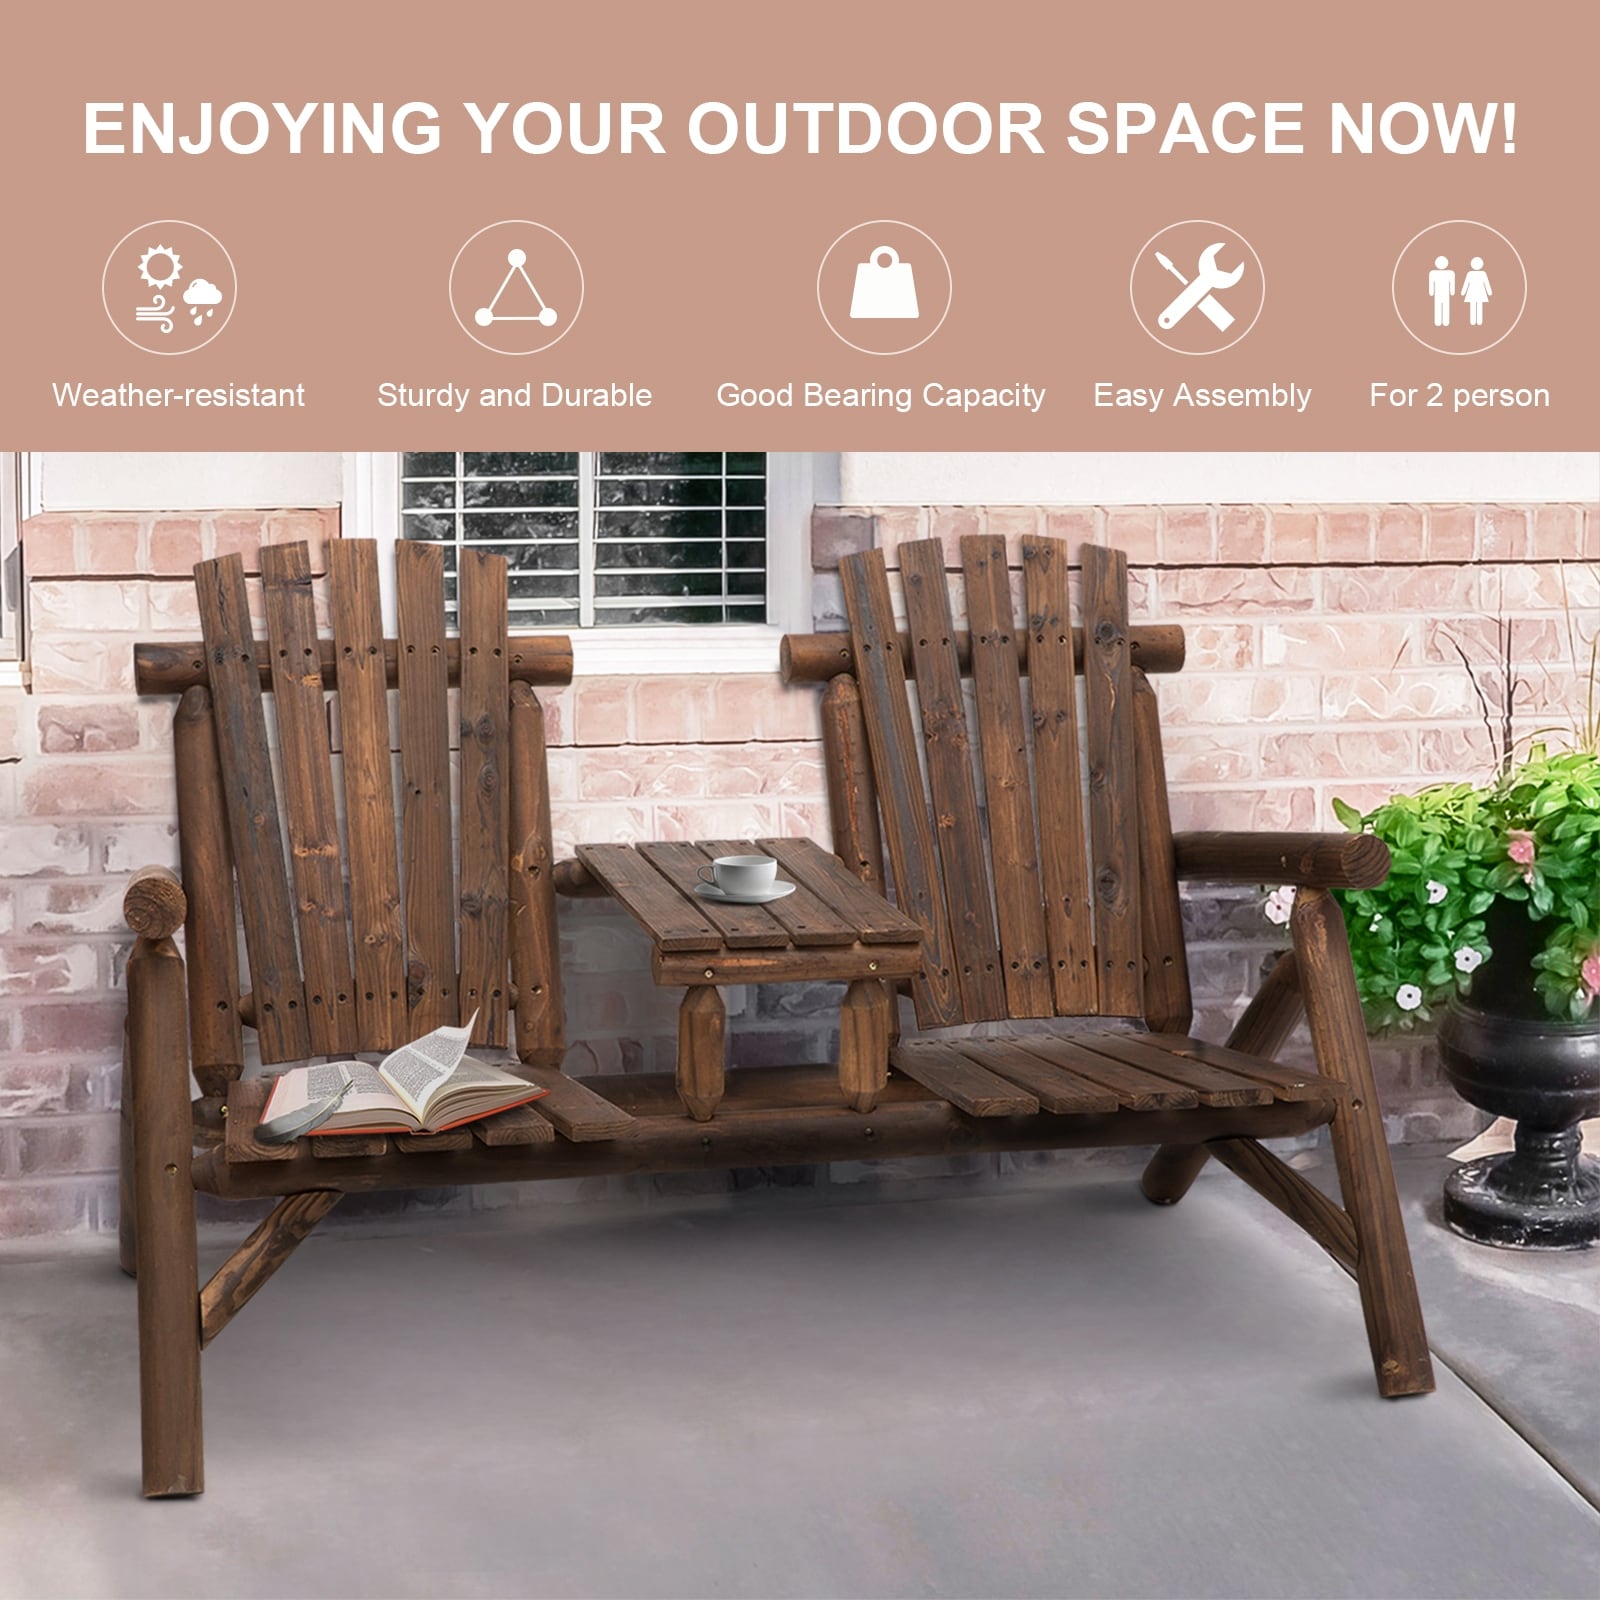 Details about   Outsunny Outdoor Tete-A-Tete  Bench Wood Adirondack Chair with Center Table Grey 